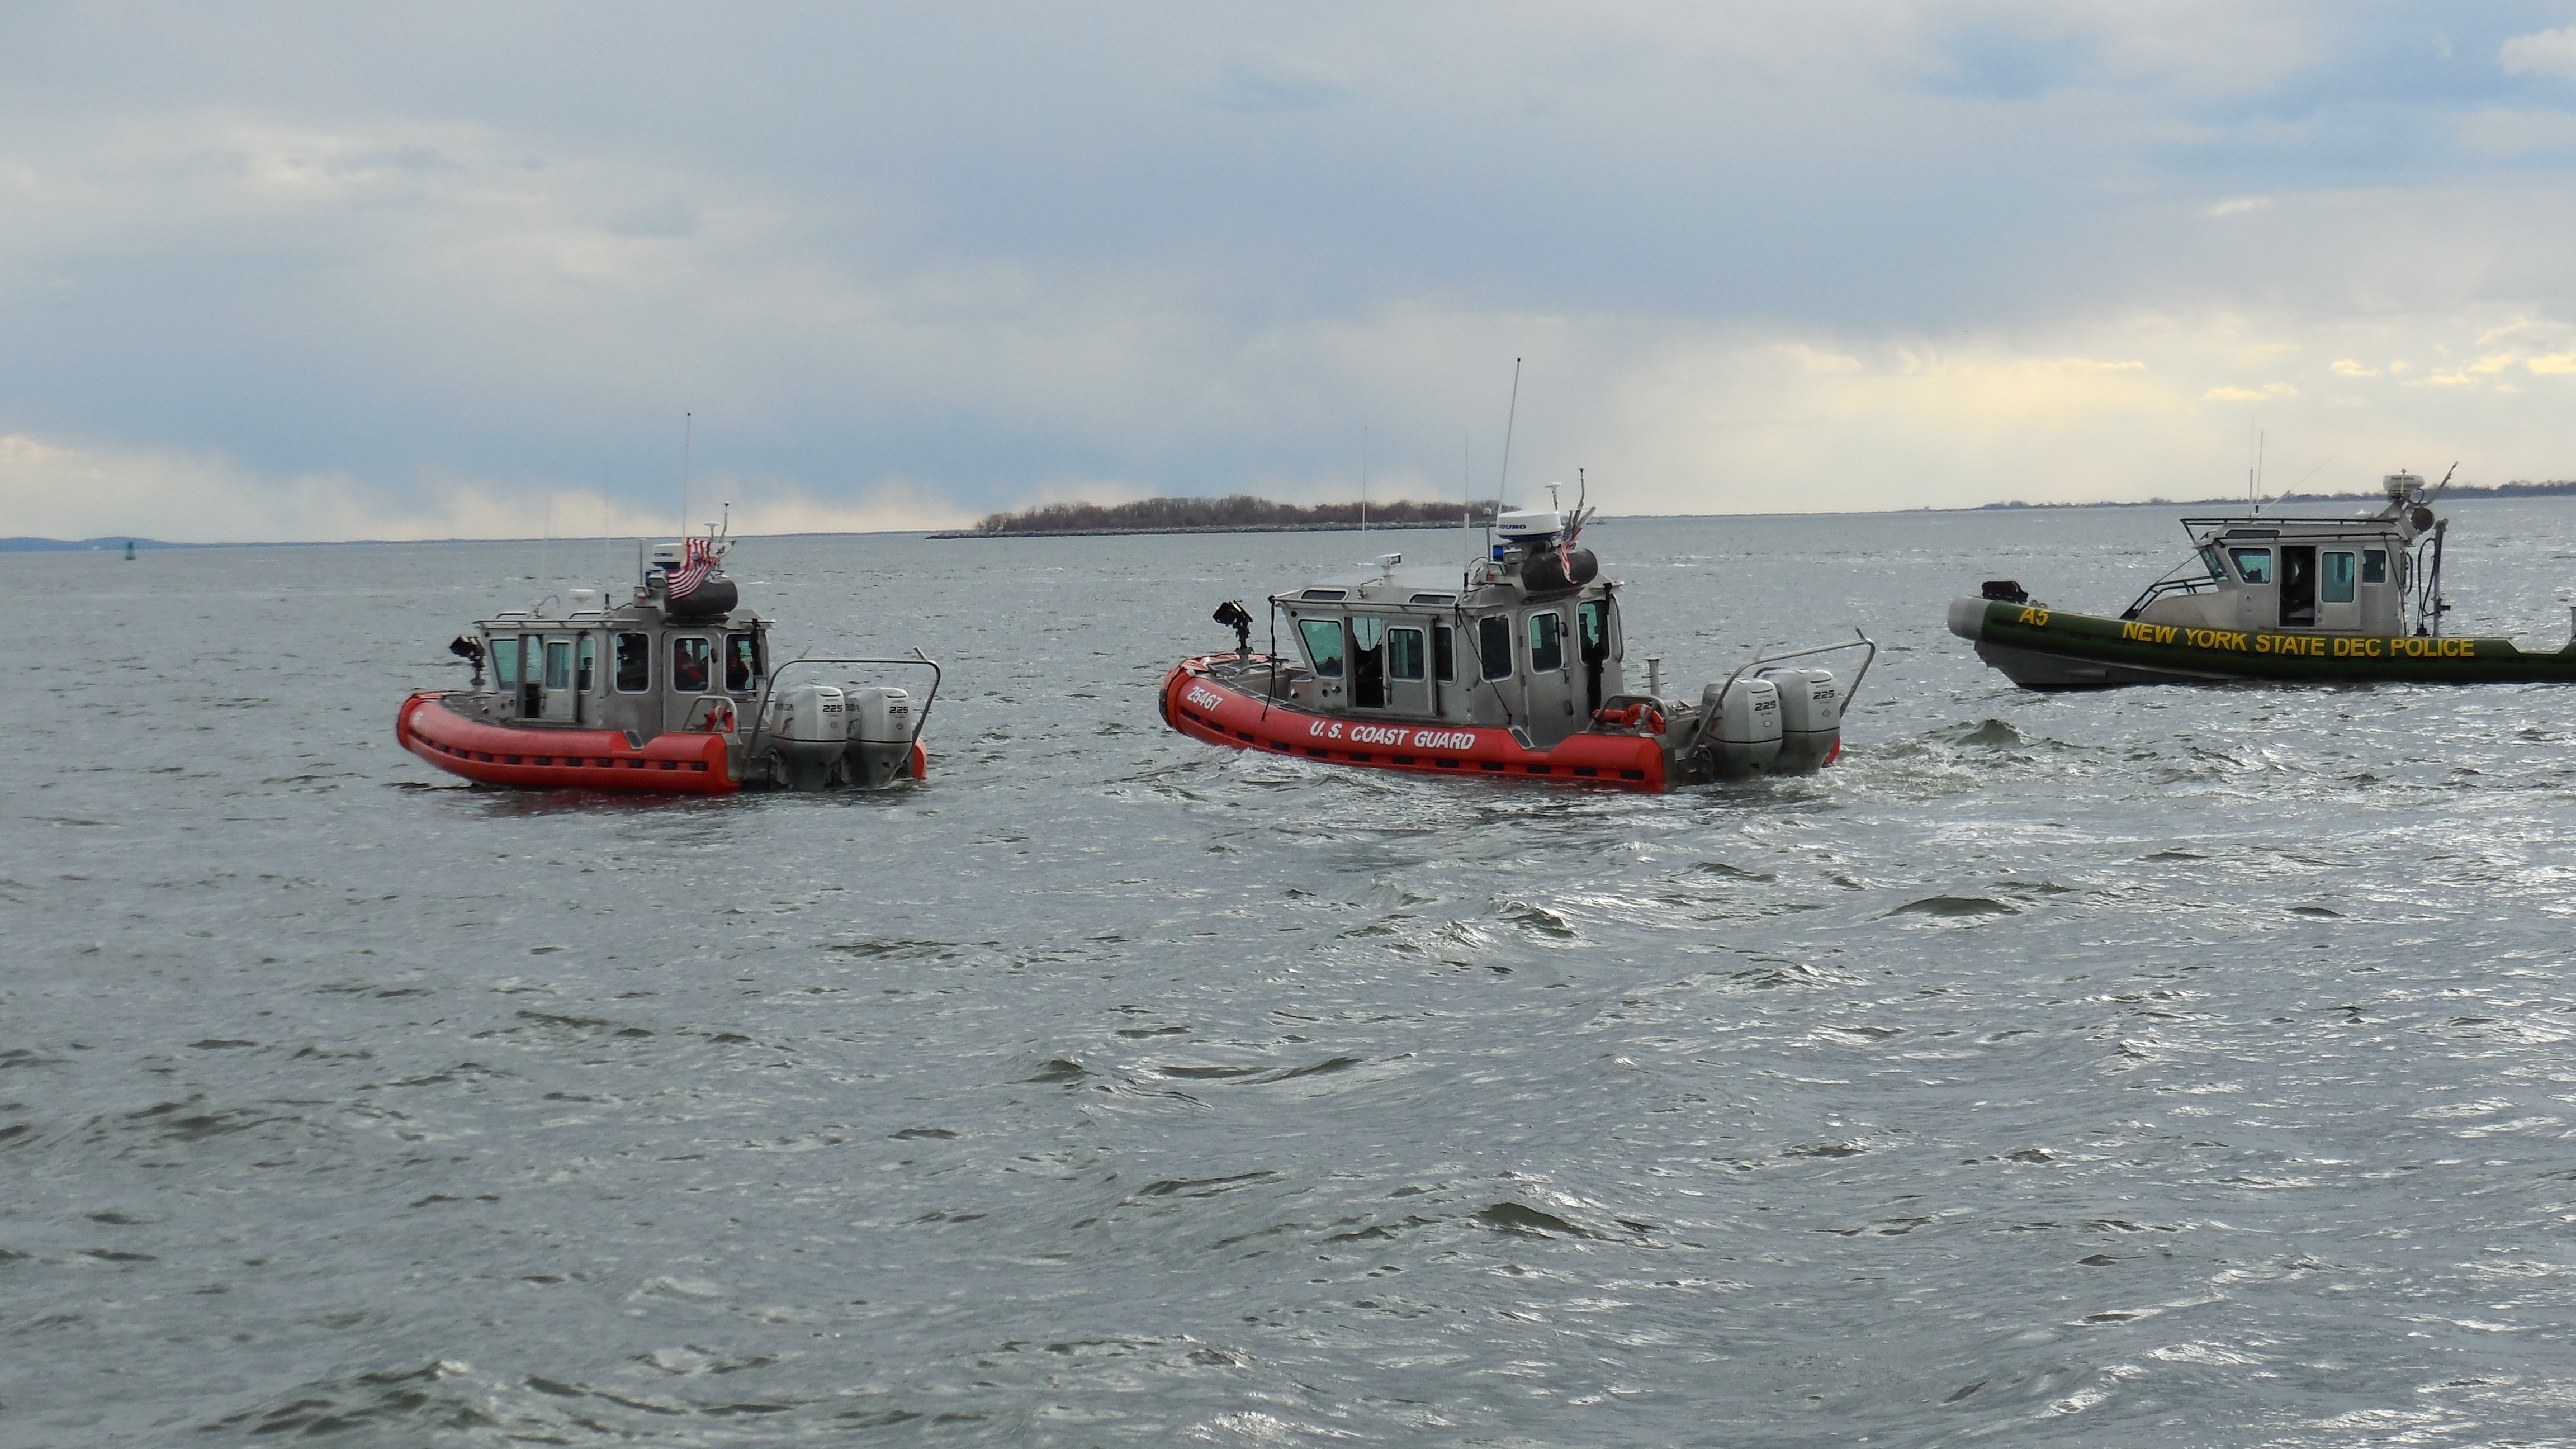 DNDO and USCG Sector New York coordianted with law enforcement and first responders on this exercise.